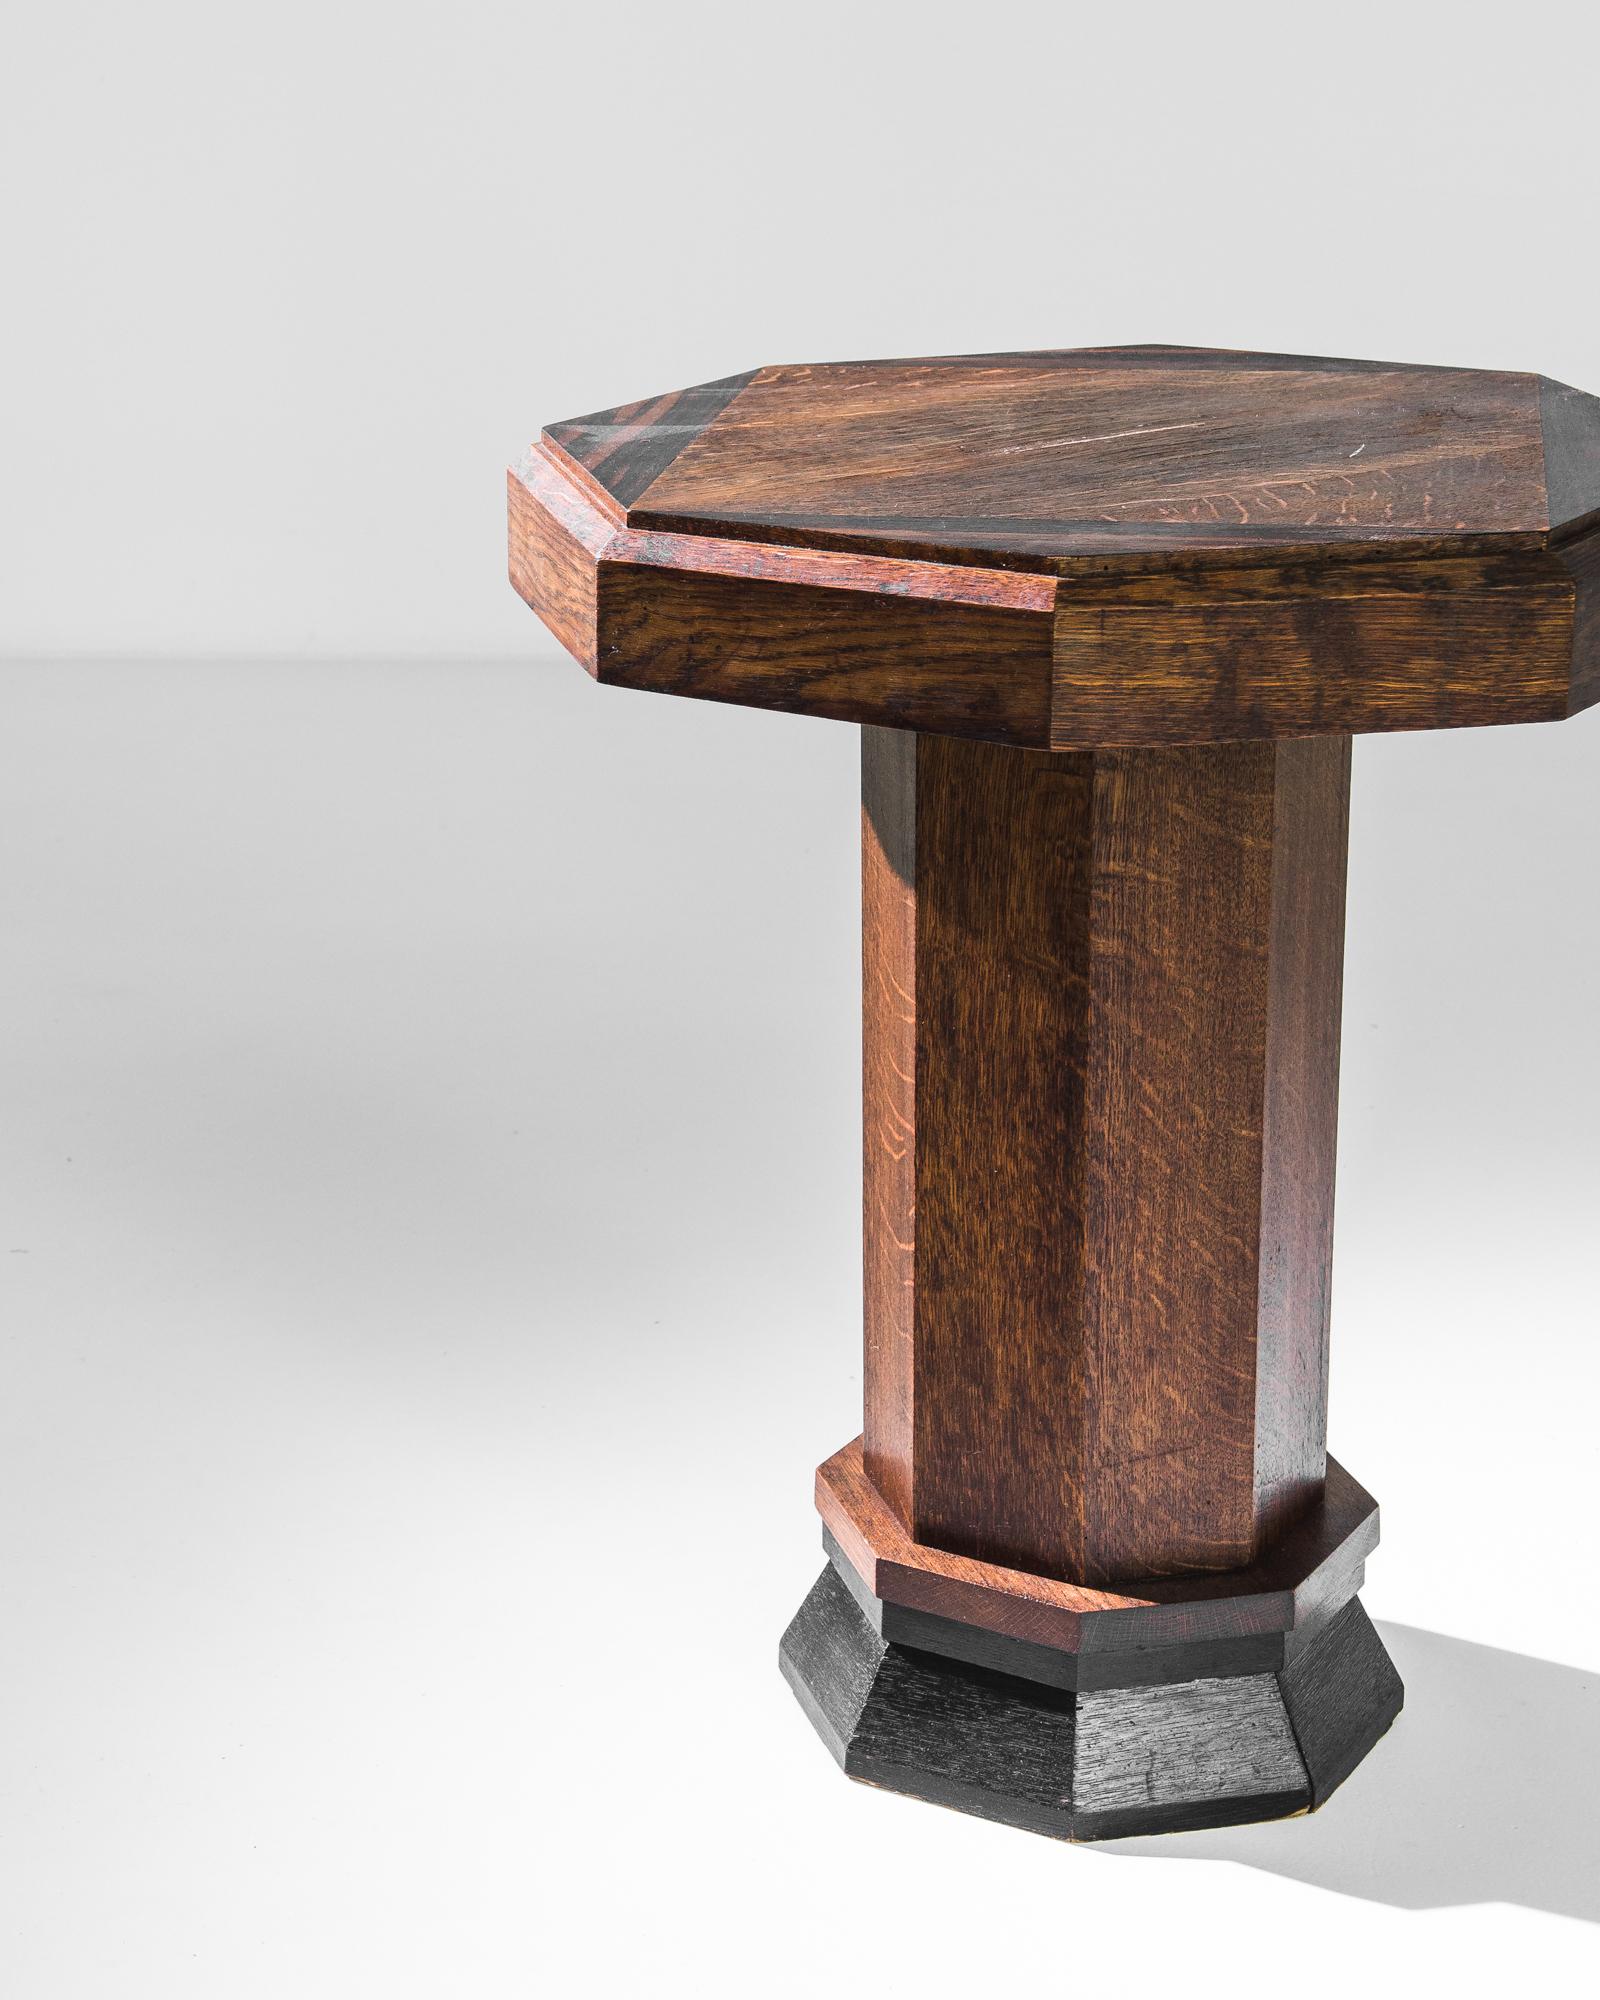 The octagonal shape of this wooden side table creates an eye-catching silhouette. Made in France in the 1920s, the wood retains its original patina: a deep tawny color with a rich polish. Triangular inlays accentuate the angles of the eight-sided